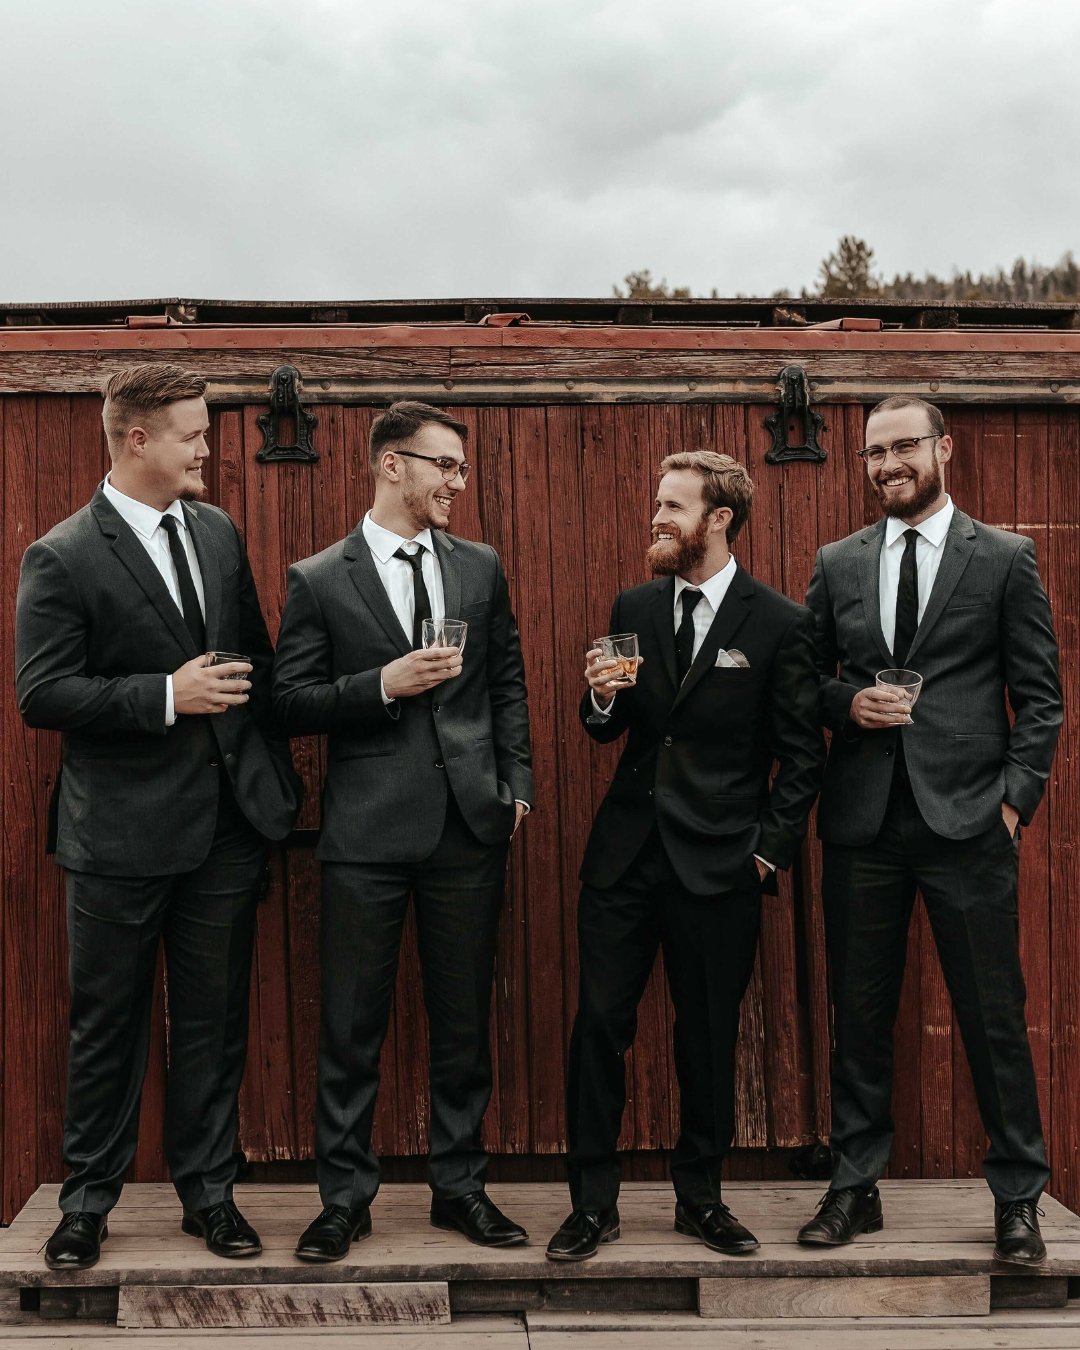 Events - Weddings - Groomsmen in front of Railcar Lounge